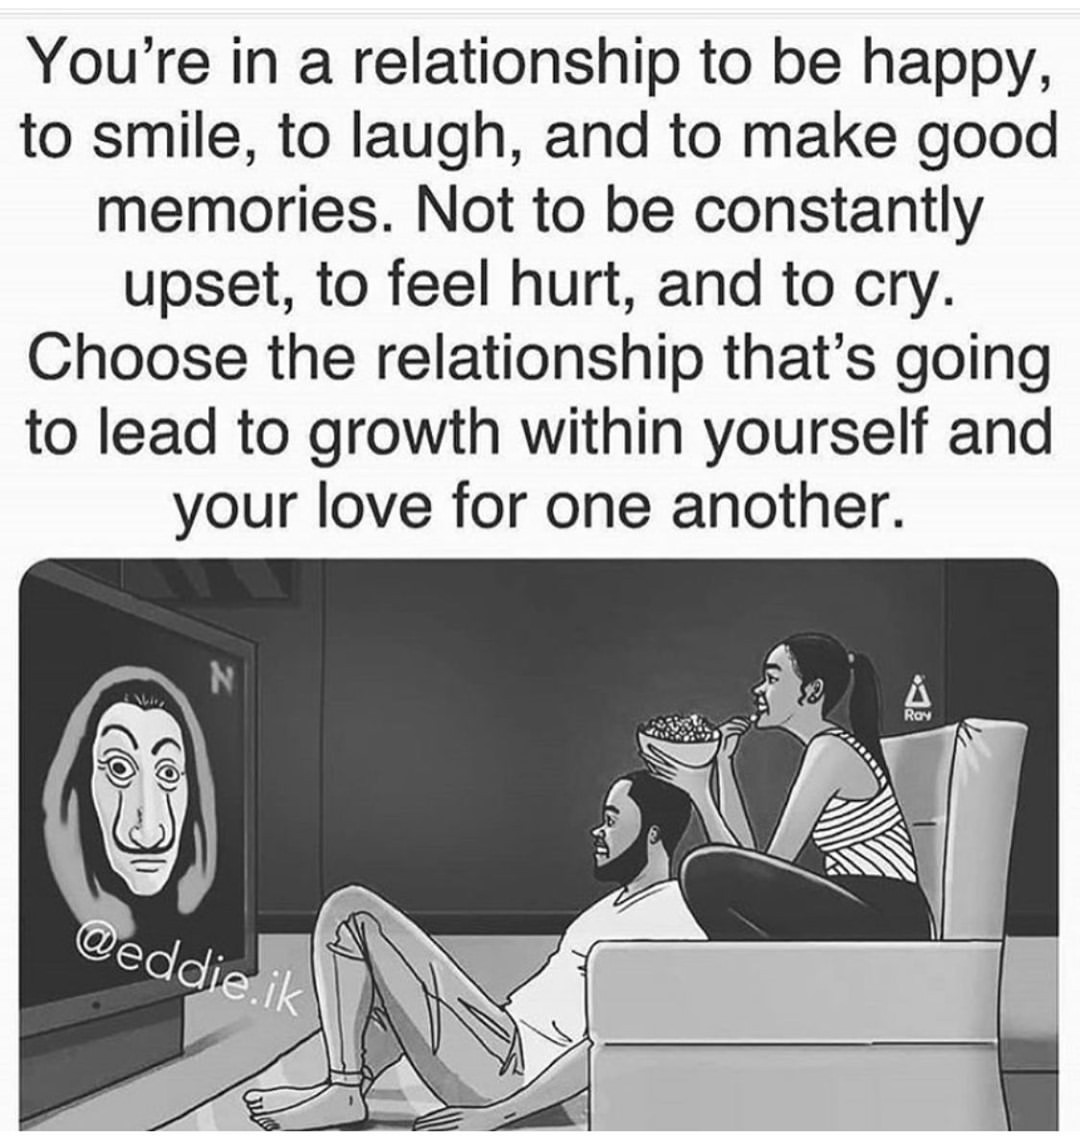 You're in a relationship to be happy, to smile, to laugh, and to make good memories. Not to be constantly upset, to feel hurt, and to cry. Choose the relationship that's going to lead to growth within yourself and your love for one another.